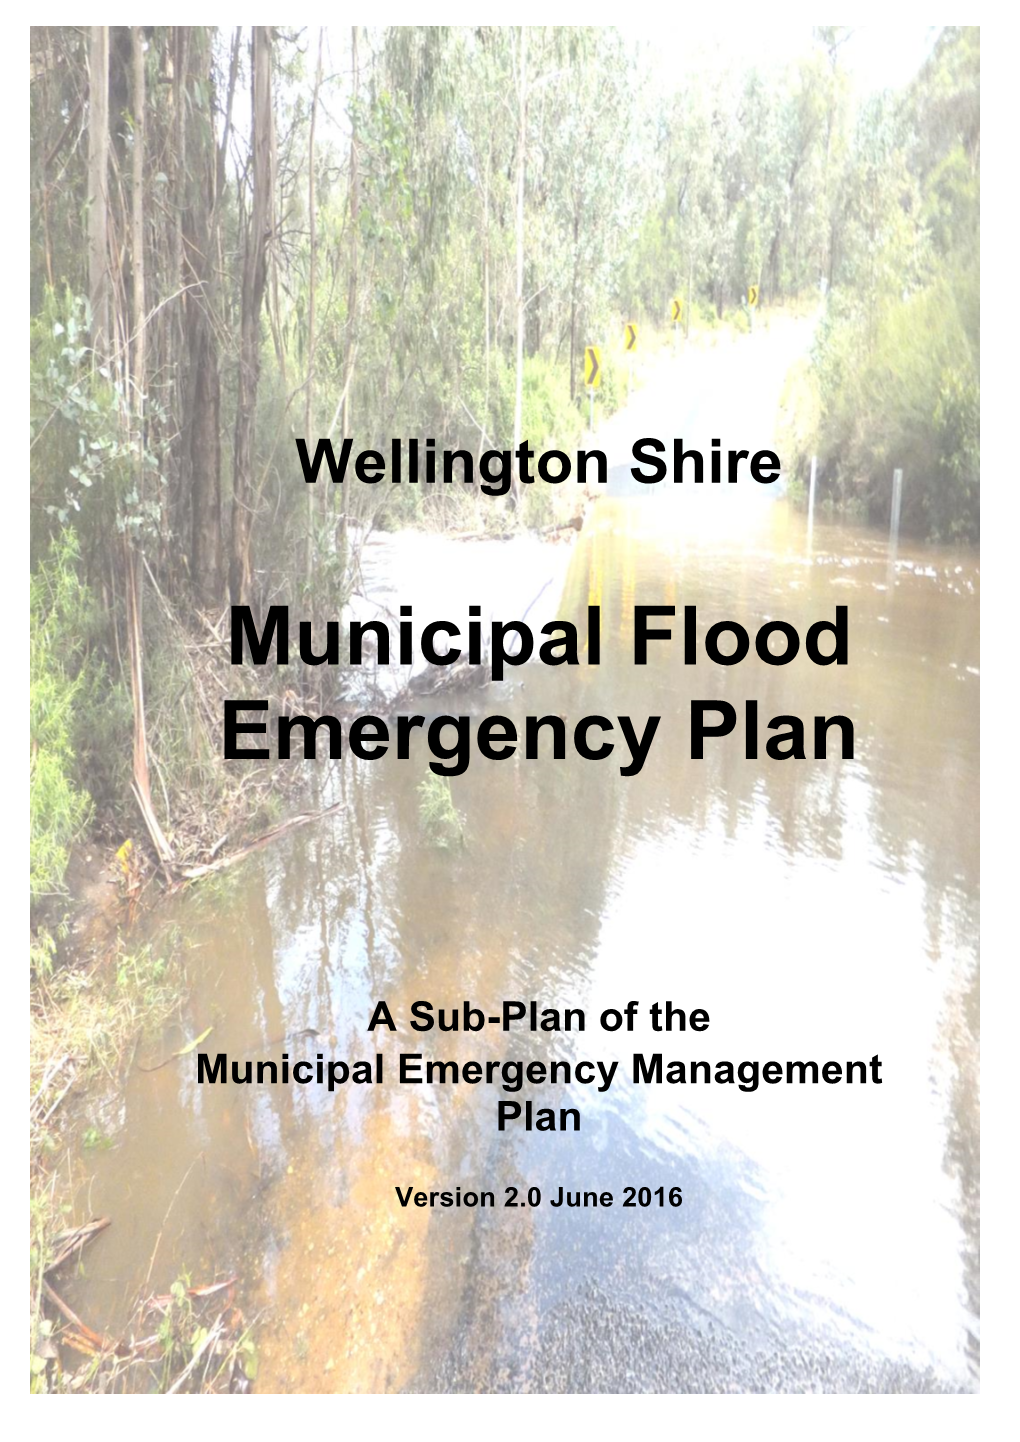 Wellington Shire Municipal Flood Emergency Plan As Adopted by the Municipal Emergency Management Planning Committee on 25 July 2016